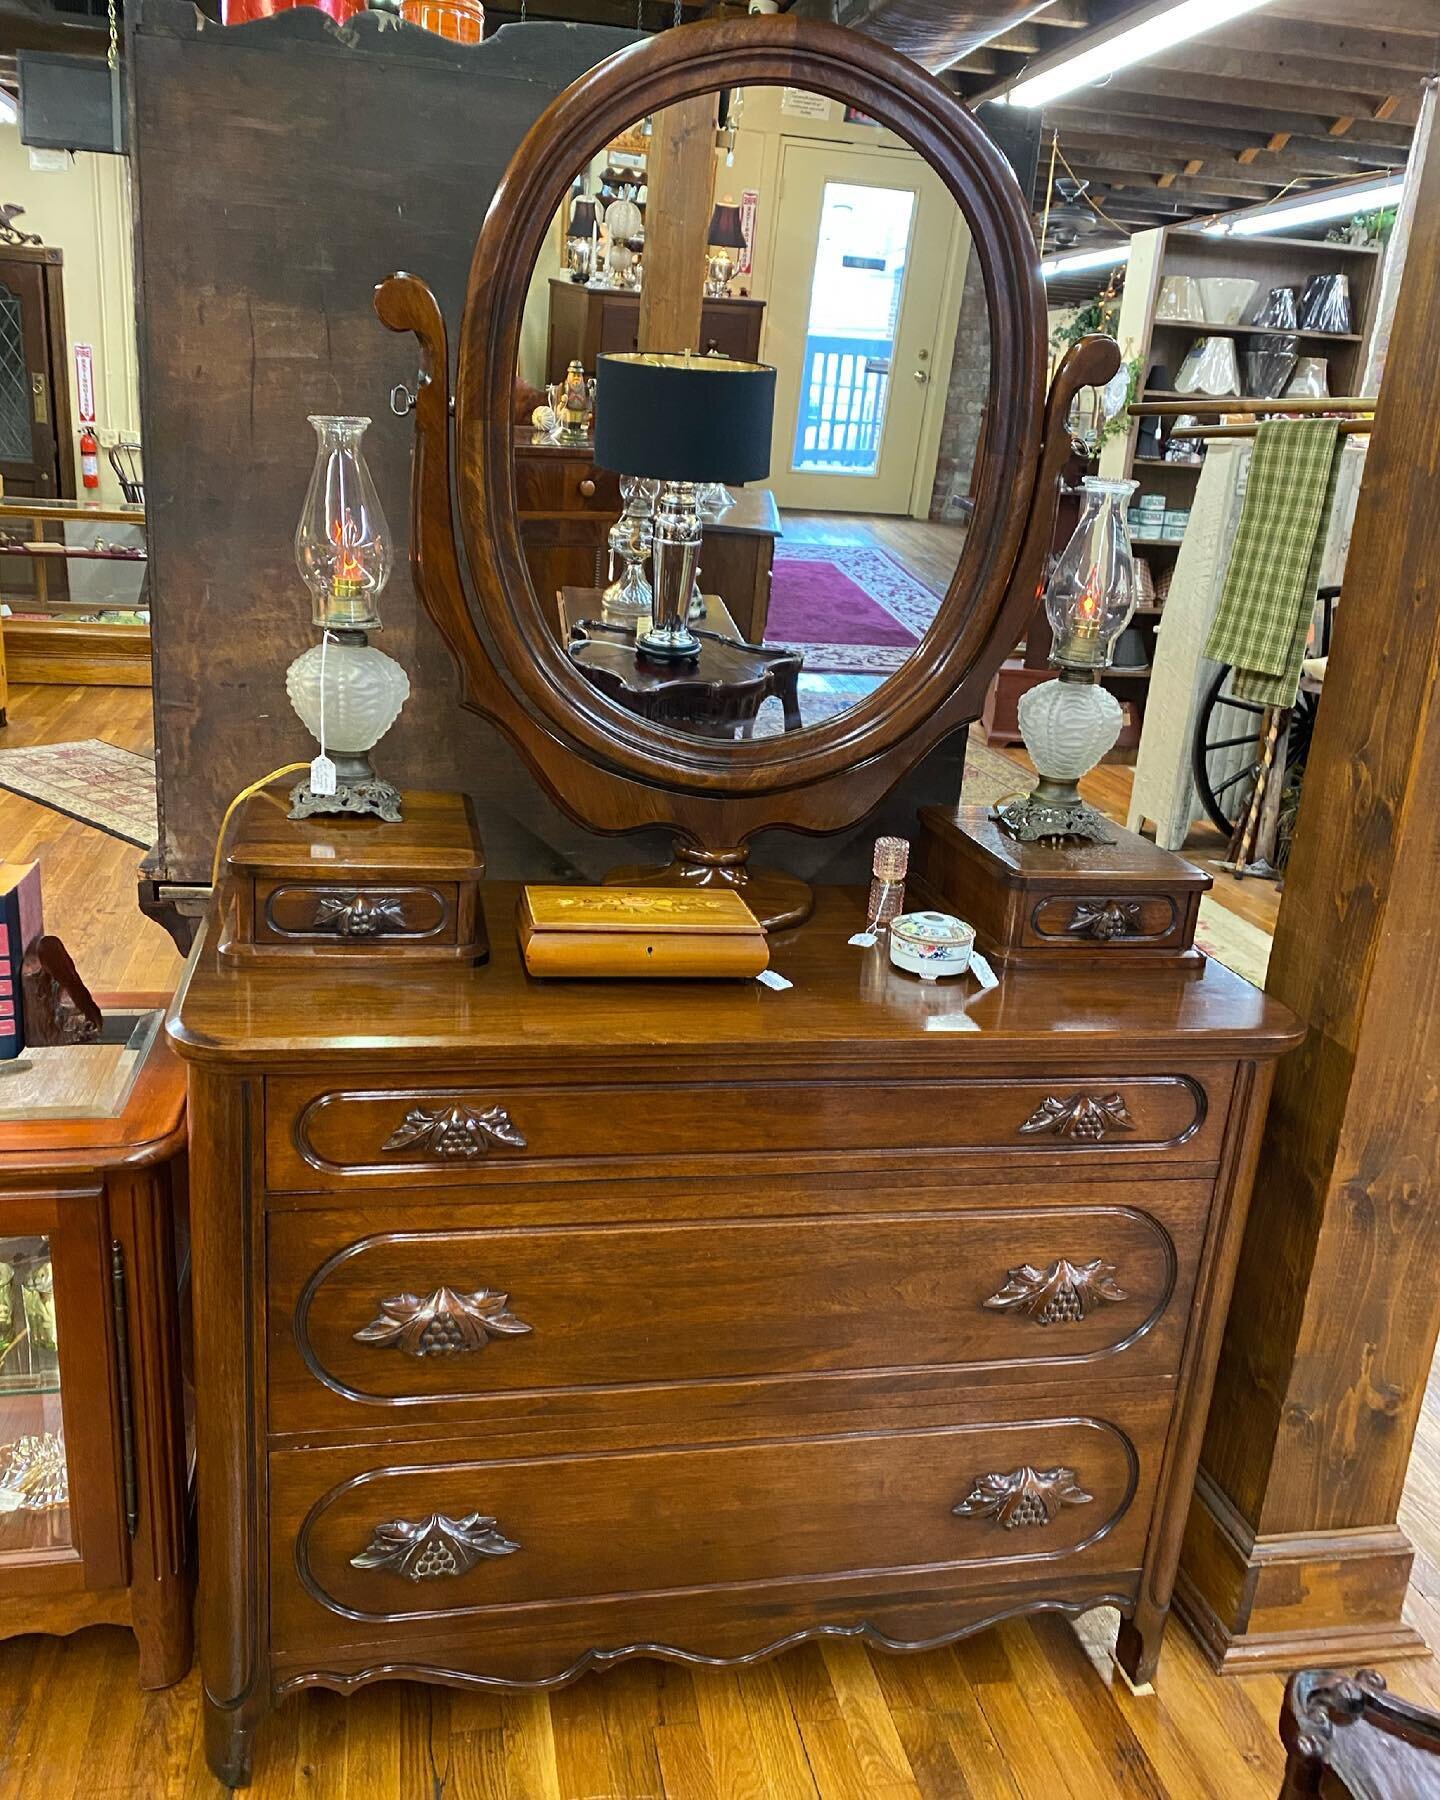 Exceptional Lillian Russell black walnut dresser and mirror circa 1920s through 1930s.... Offered by Art&rsquo;s Antiques at The Antique Market in Clinton Tennessee.... #knoxvilleantiques #clintontn #tennesseeantiquetrail